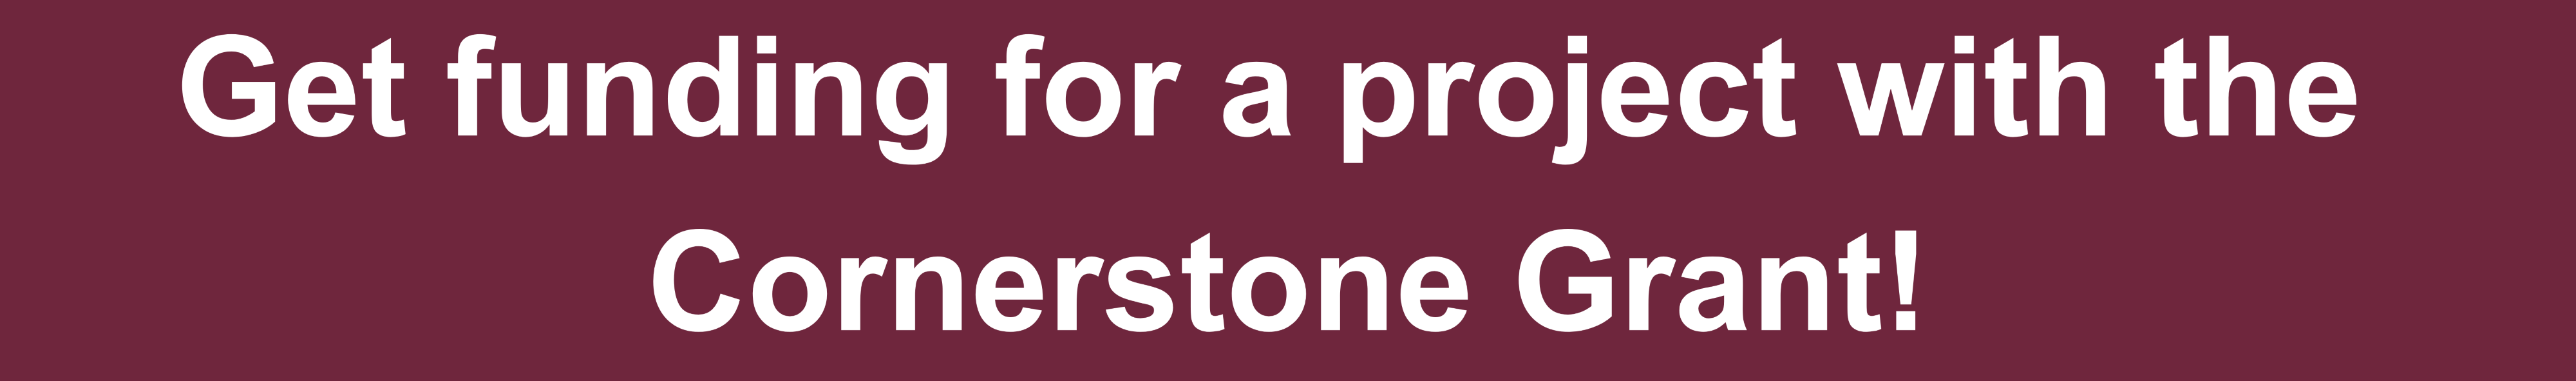 Get funding for a project with the Cornerstone Grant